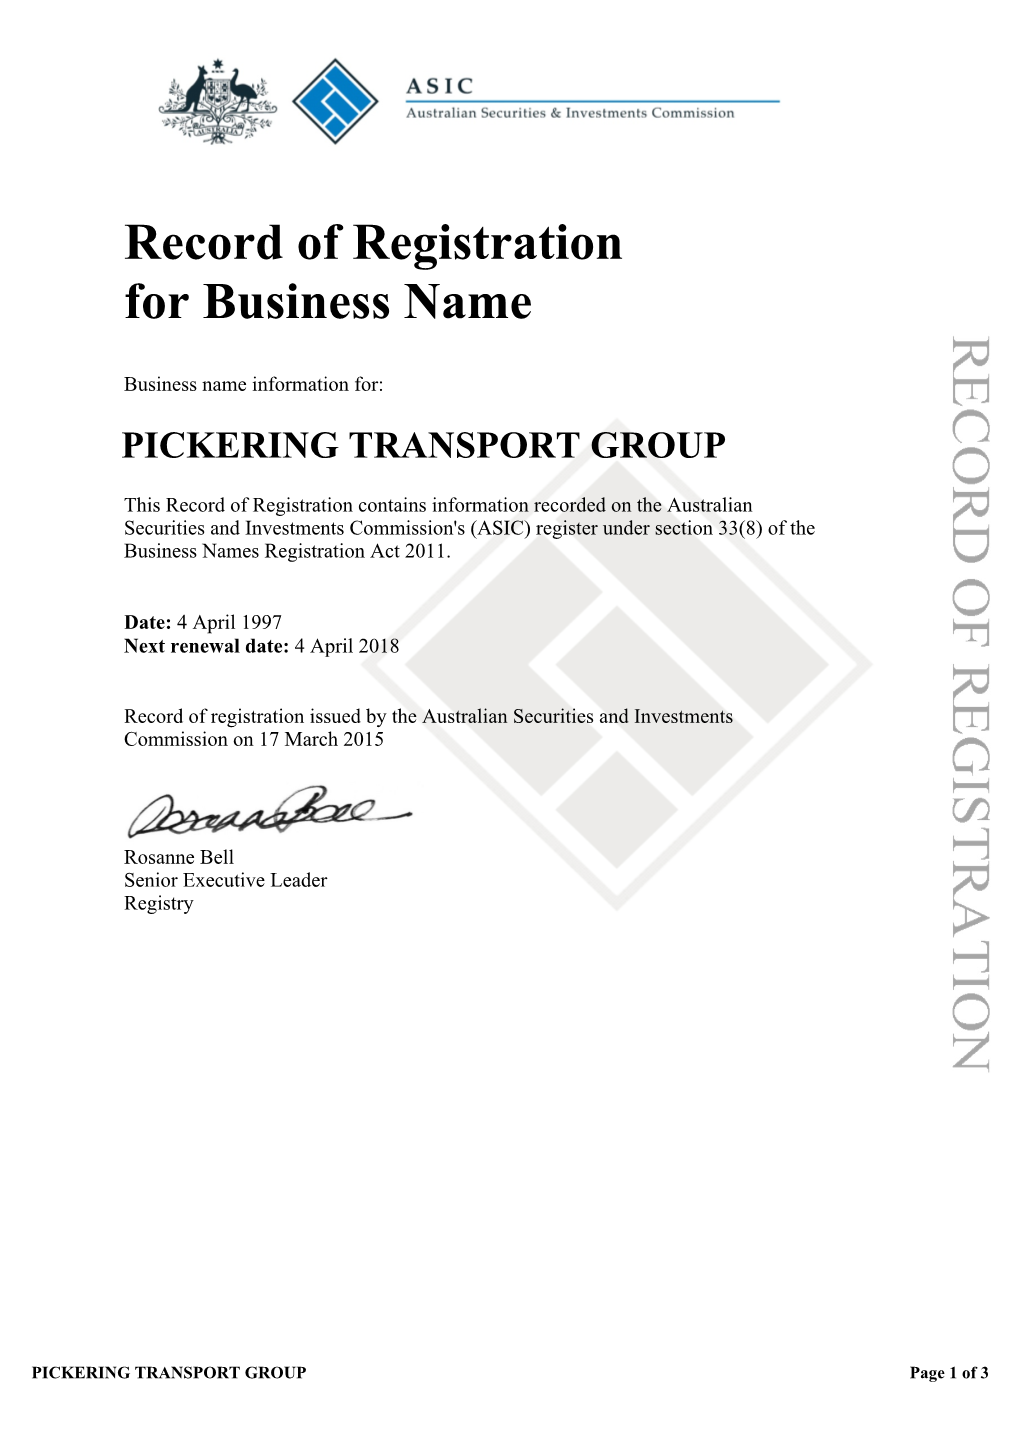 Record of Registration for Business Name